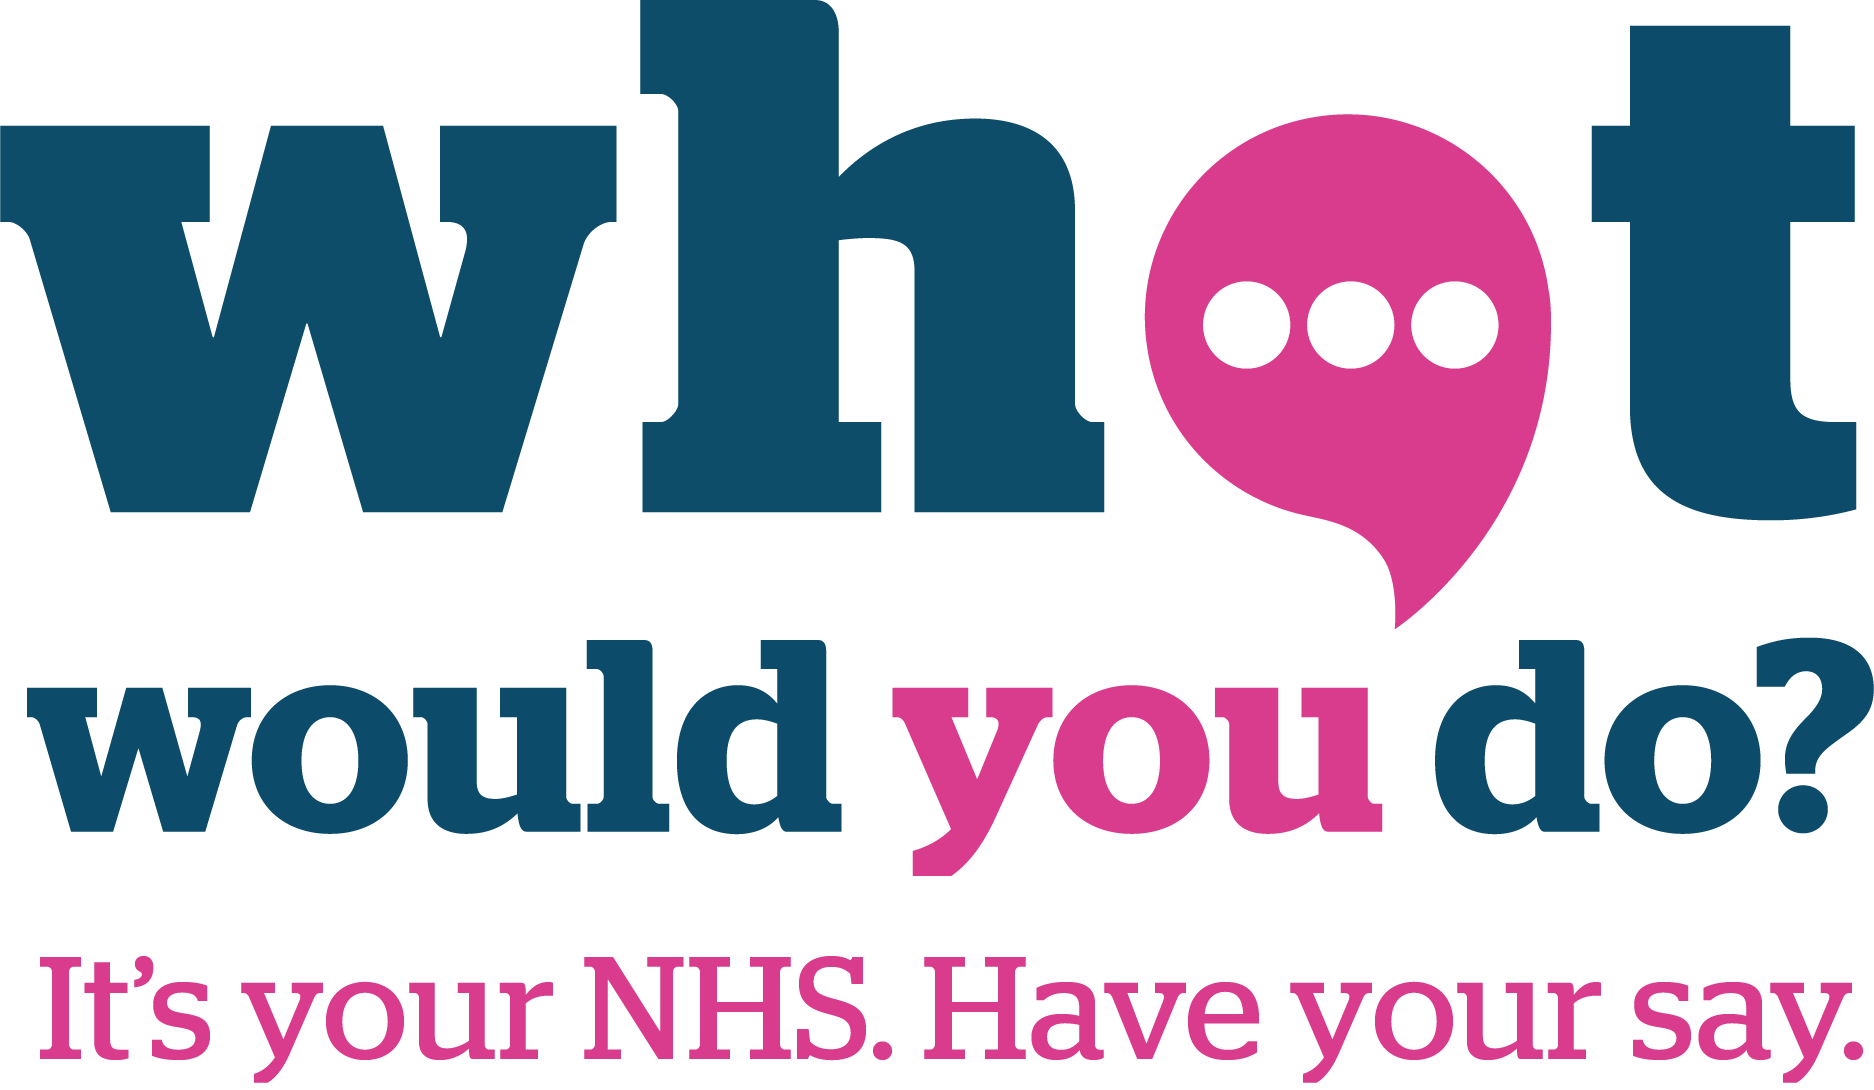 What would you do? It's your NHS. Have your say.